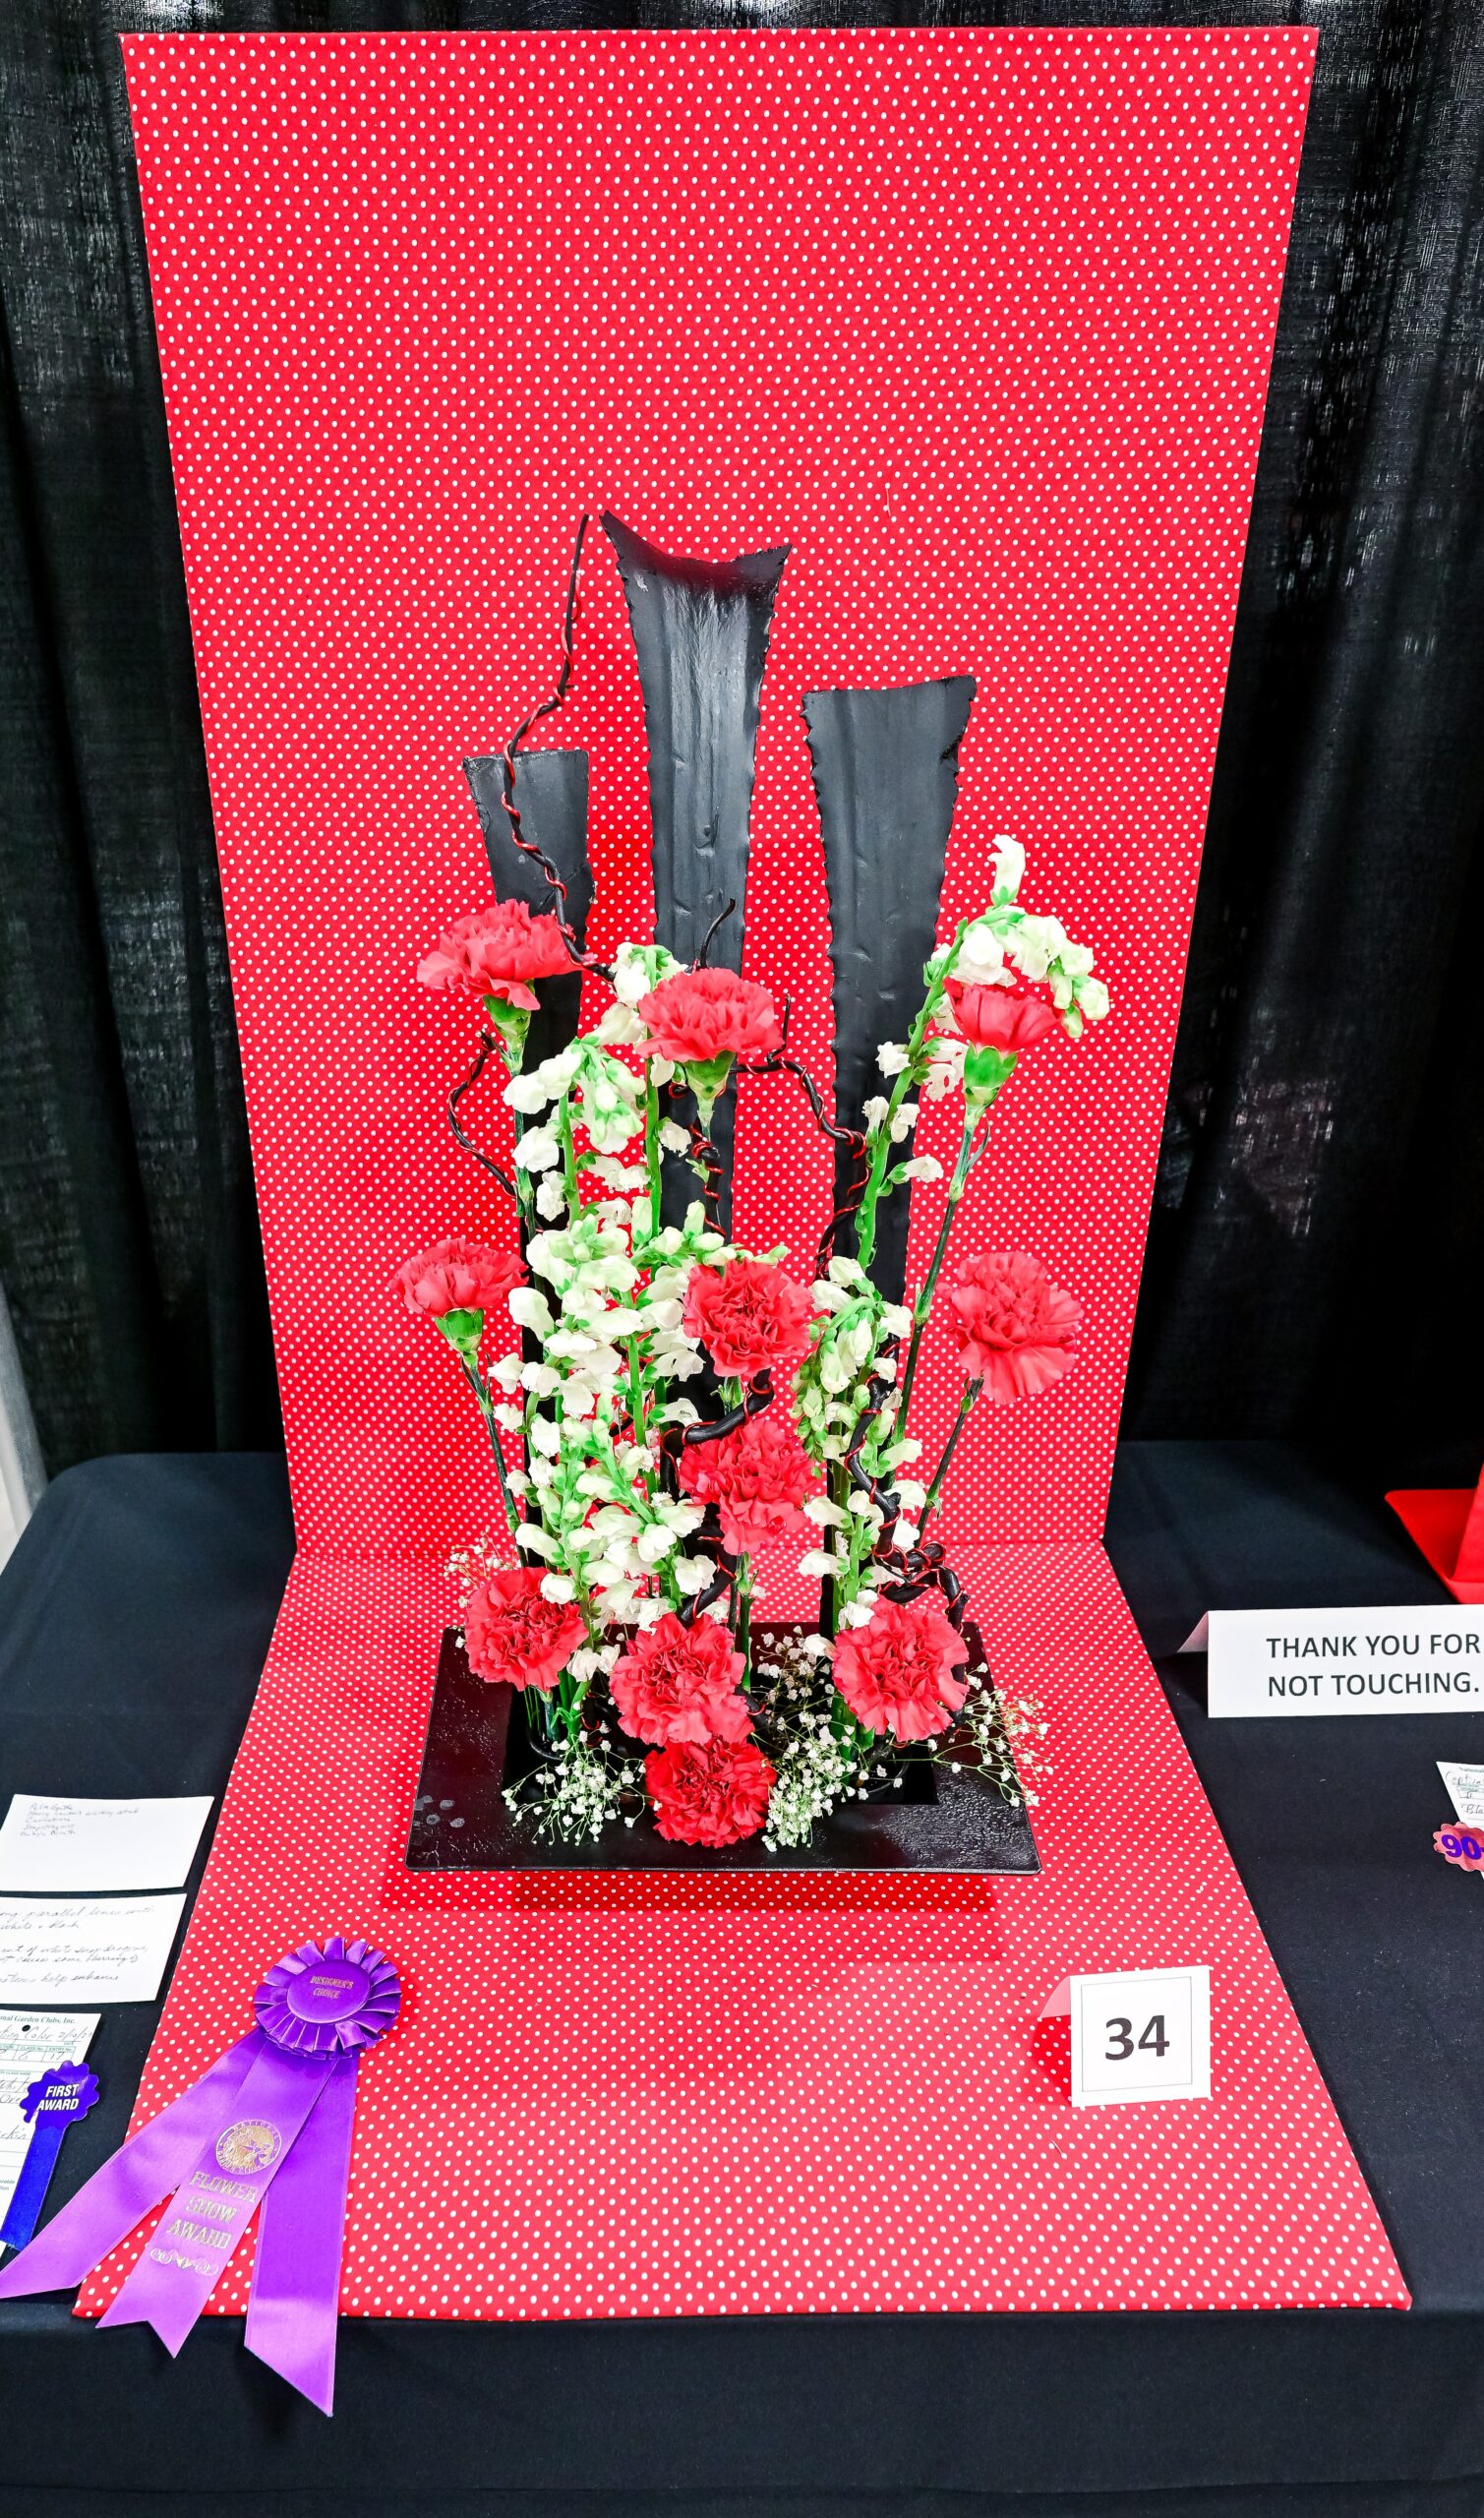 2023 Flower Show Entry